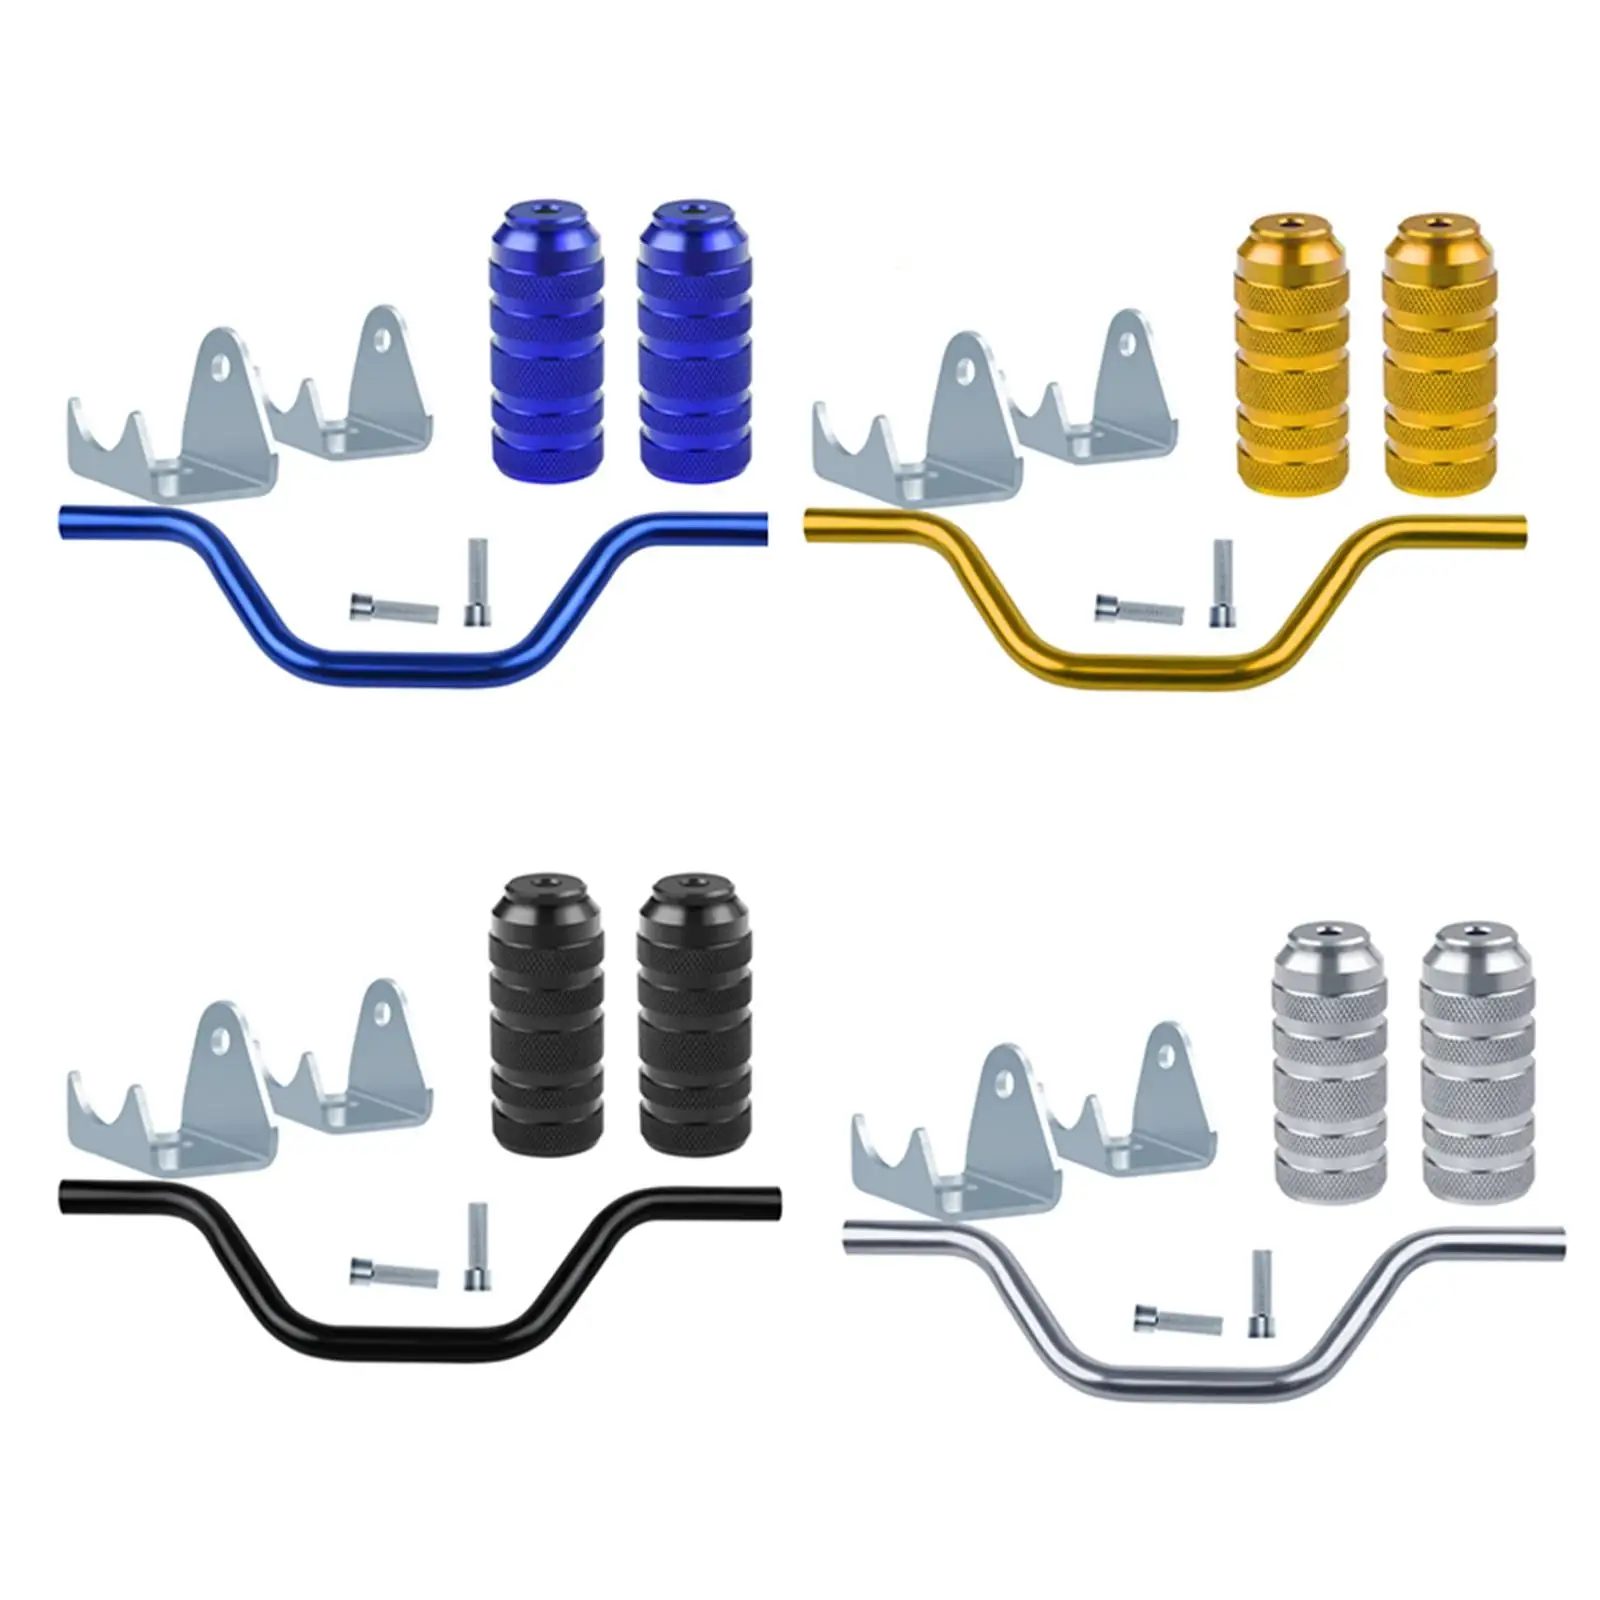  Foot Pegs Pedals Accessories CNC for Dirt Bike Moped Scooter